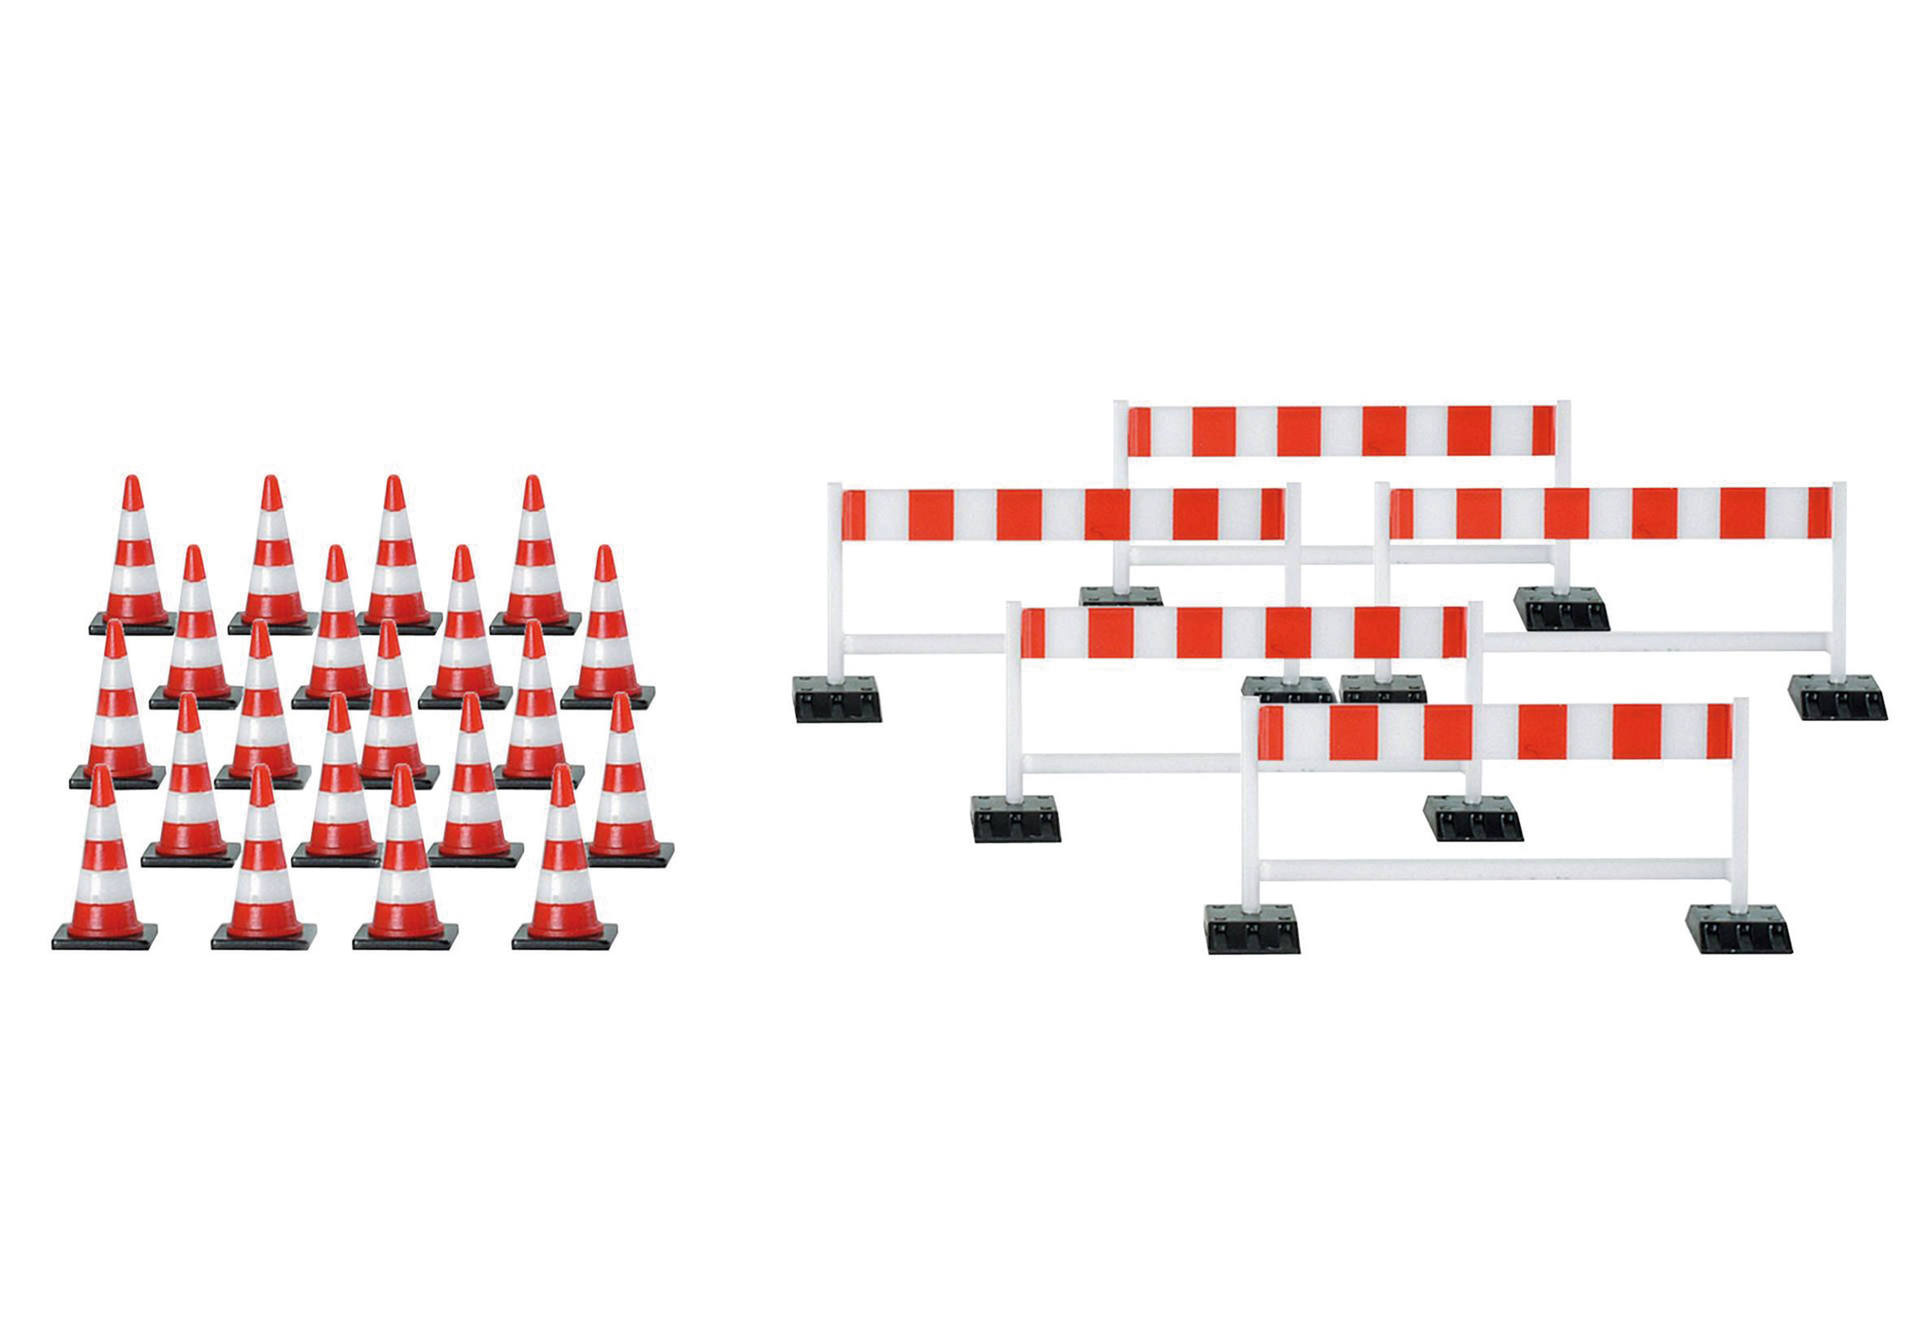 Accessory traffic cones (20 pieces), barriers (5 pieces), red/white